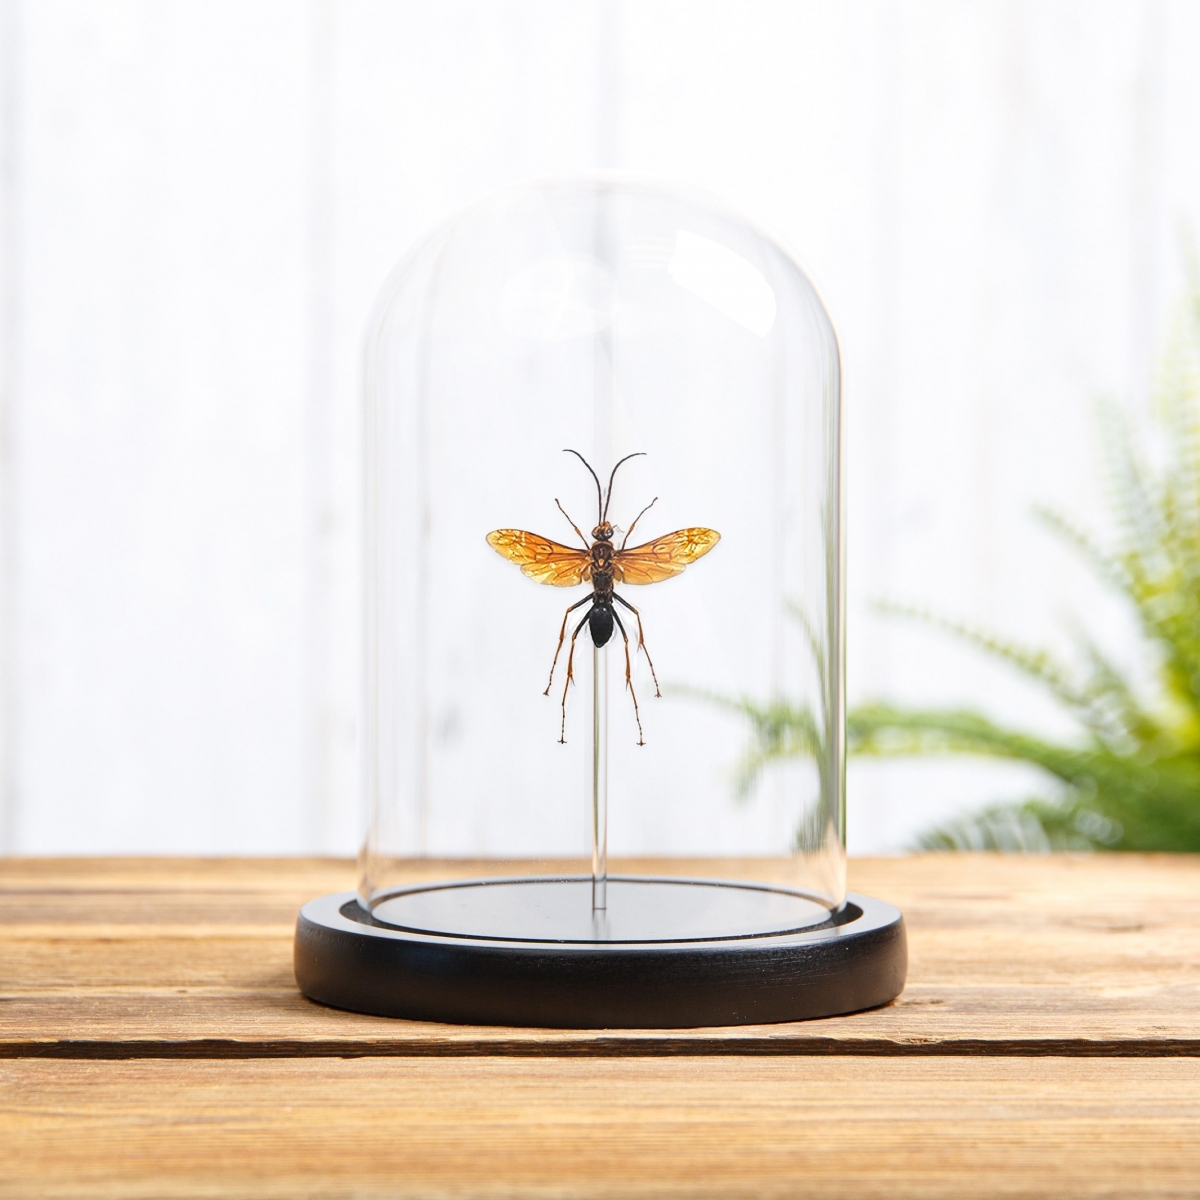 Minibeast Large Pepsine Spider Wasp in Glass Dome with Wooden Base  (Hemipepsis sp)